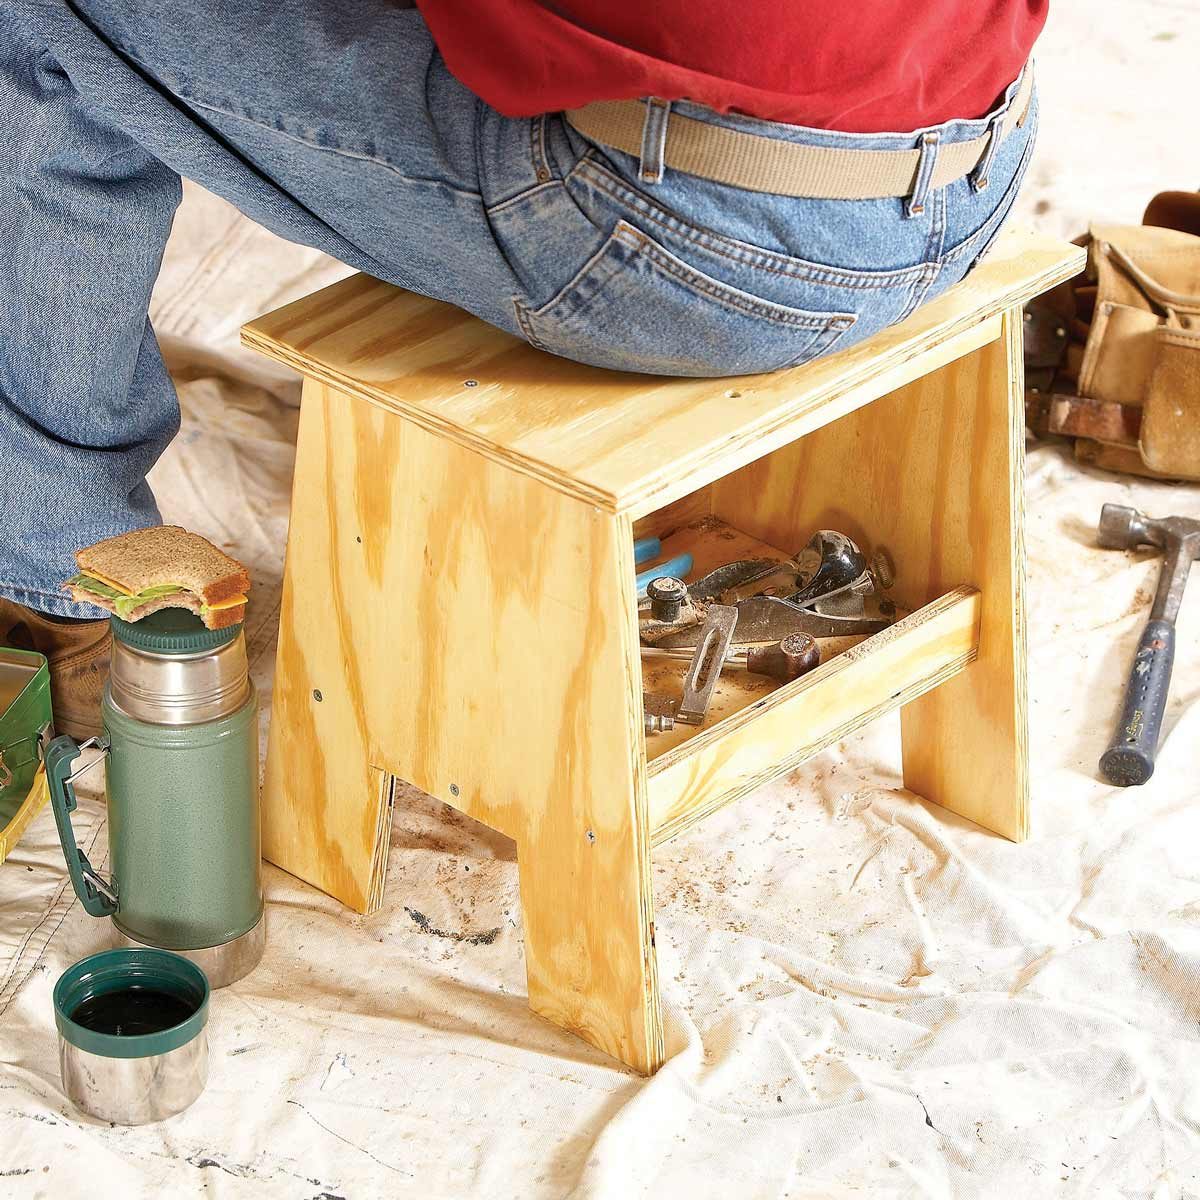 Woodworking ideas small